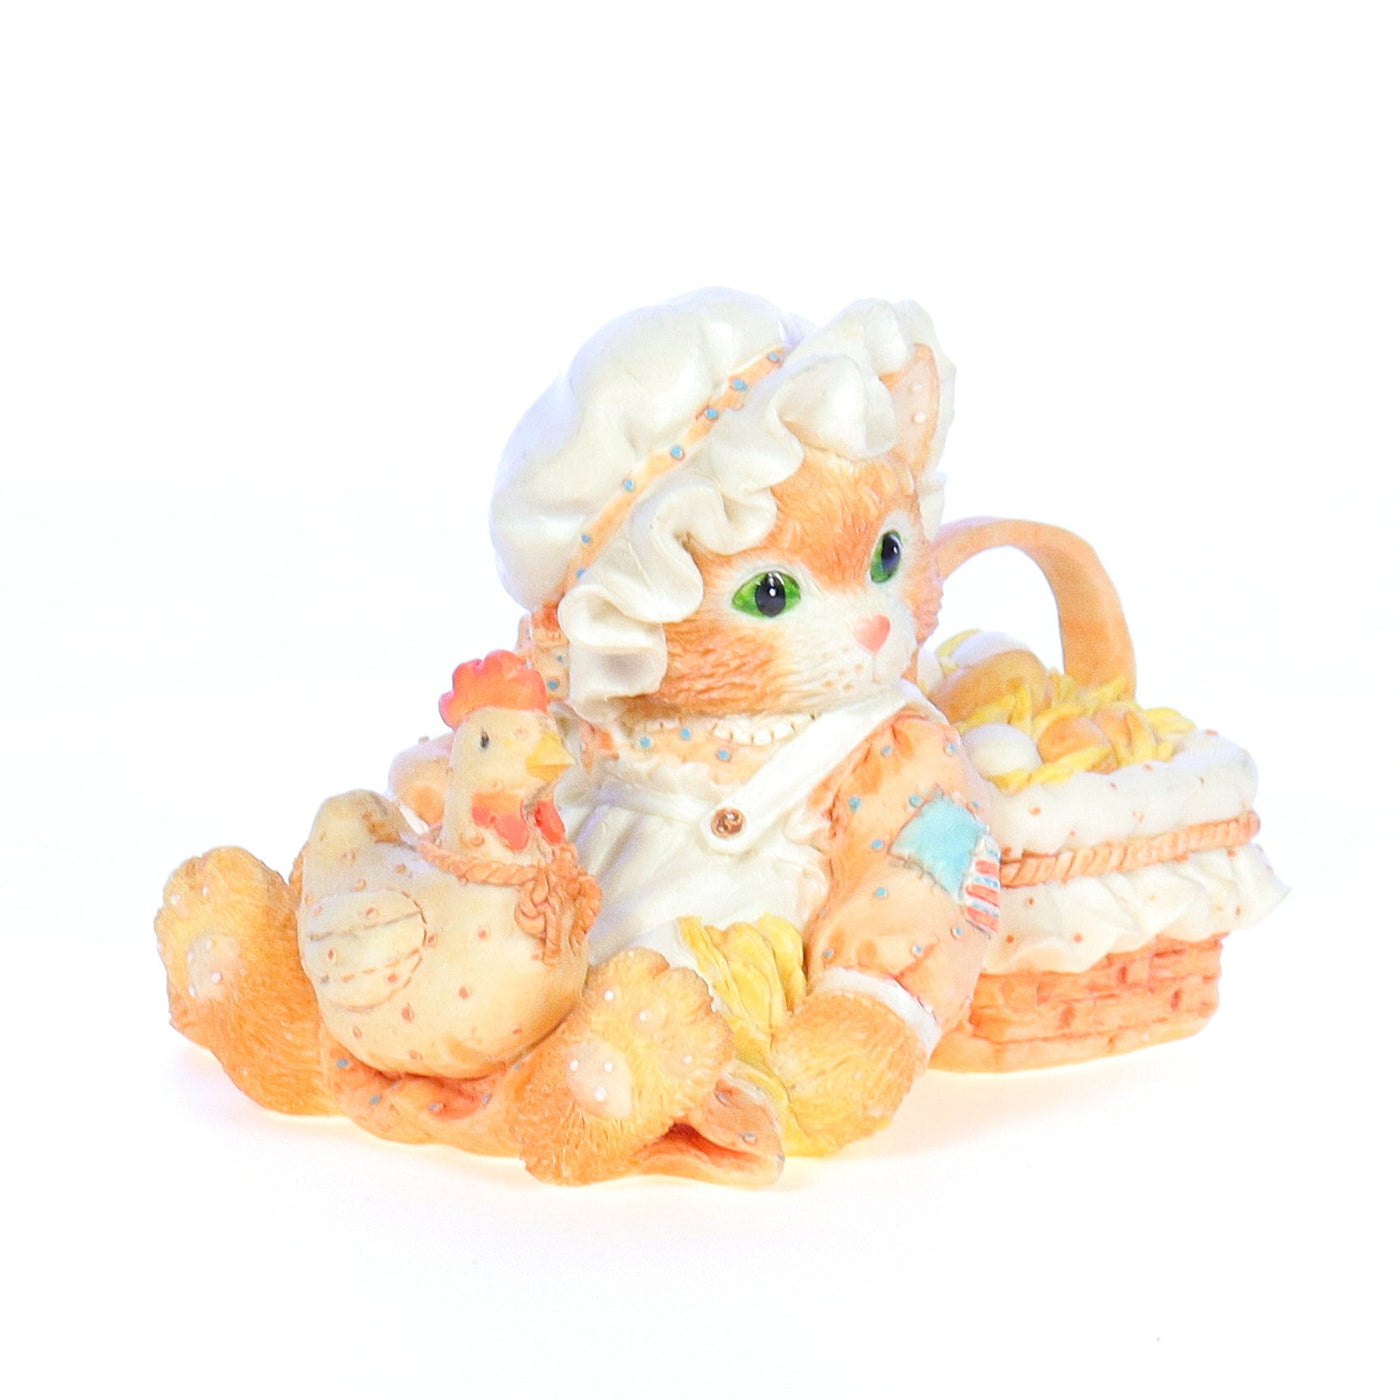 Calico_Kittens_Friendship_is_the_Best_Blessing_Spring_Figurine_1994